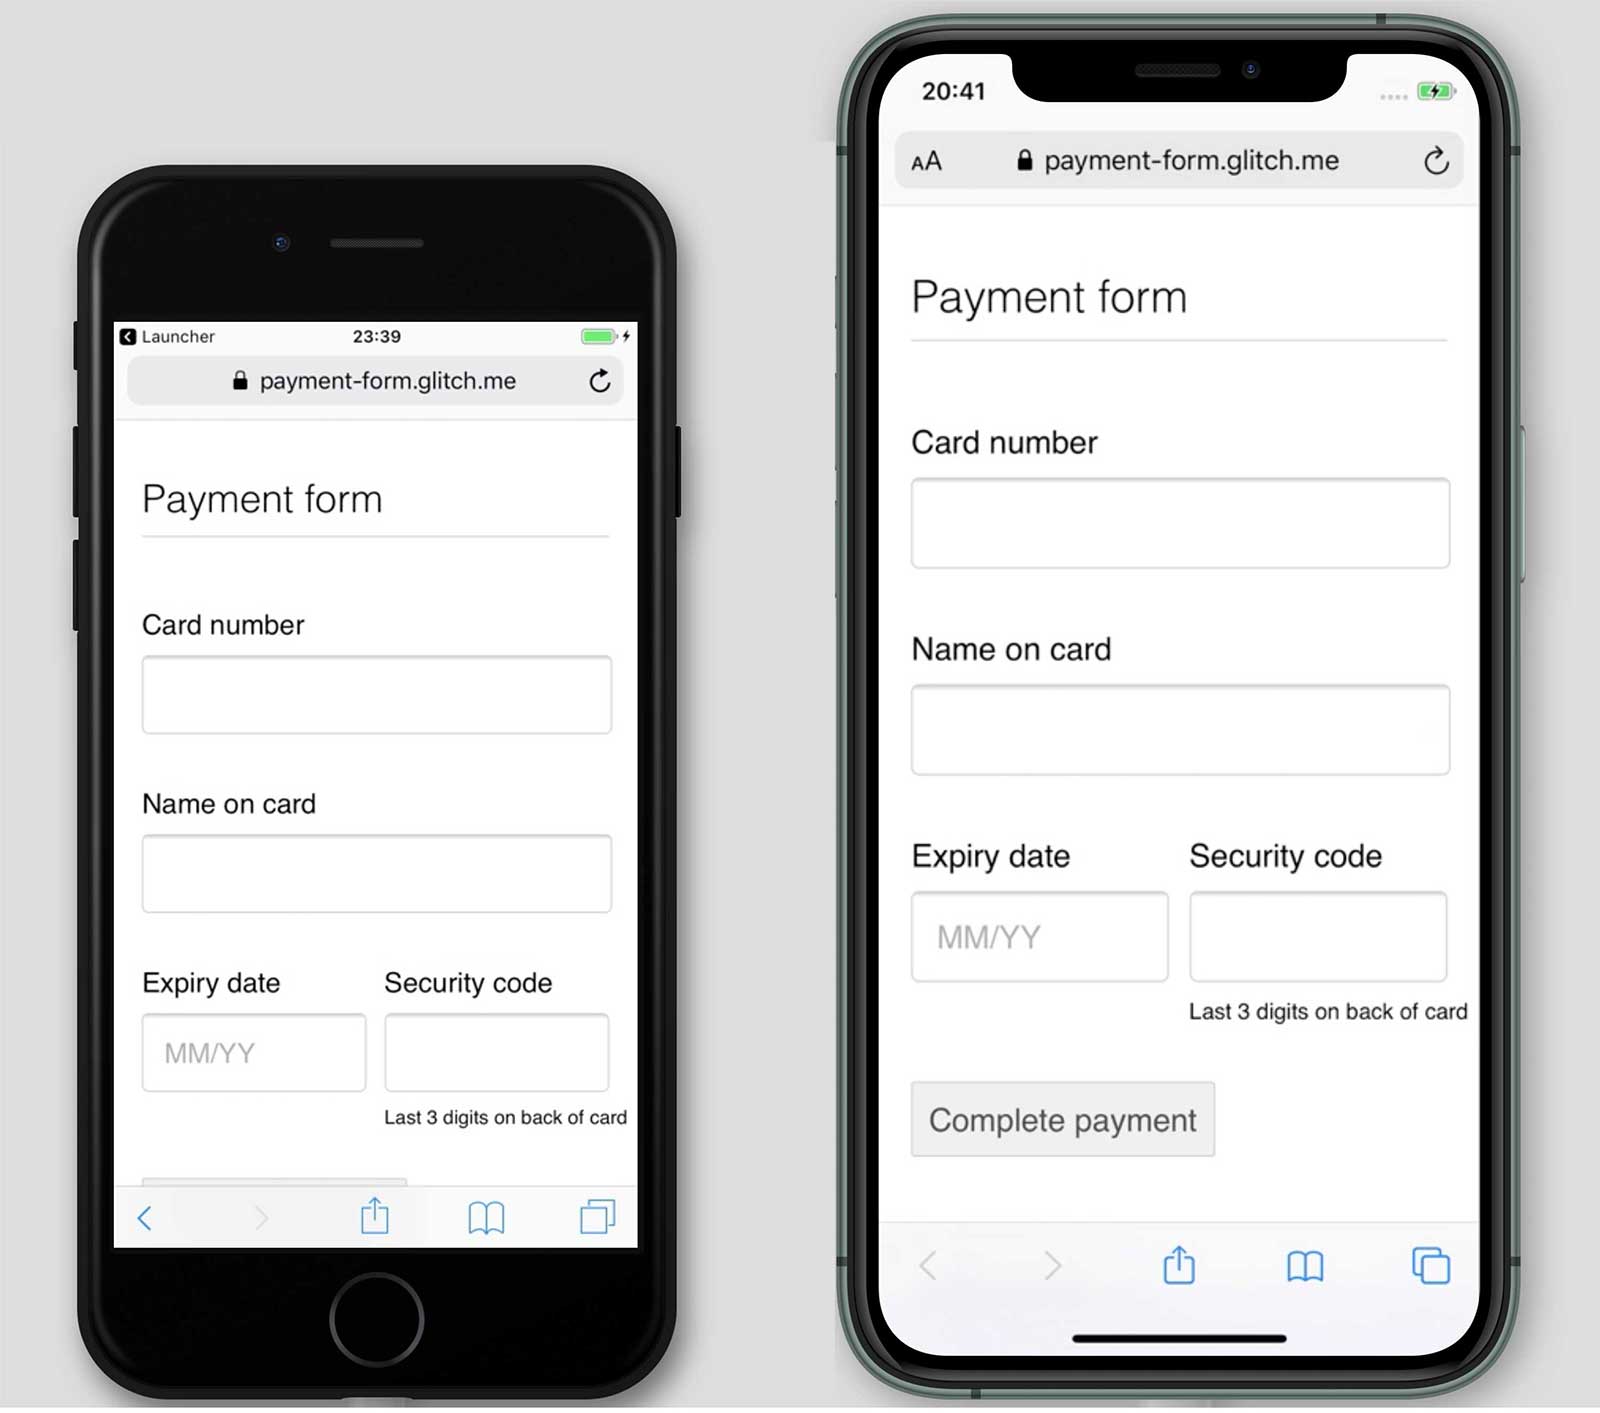 Screenshots of a payment form, payment-form.glitch.me, on iPhone 7 and 11. The Complete Payment button is shown on iPhone 11 but not 7